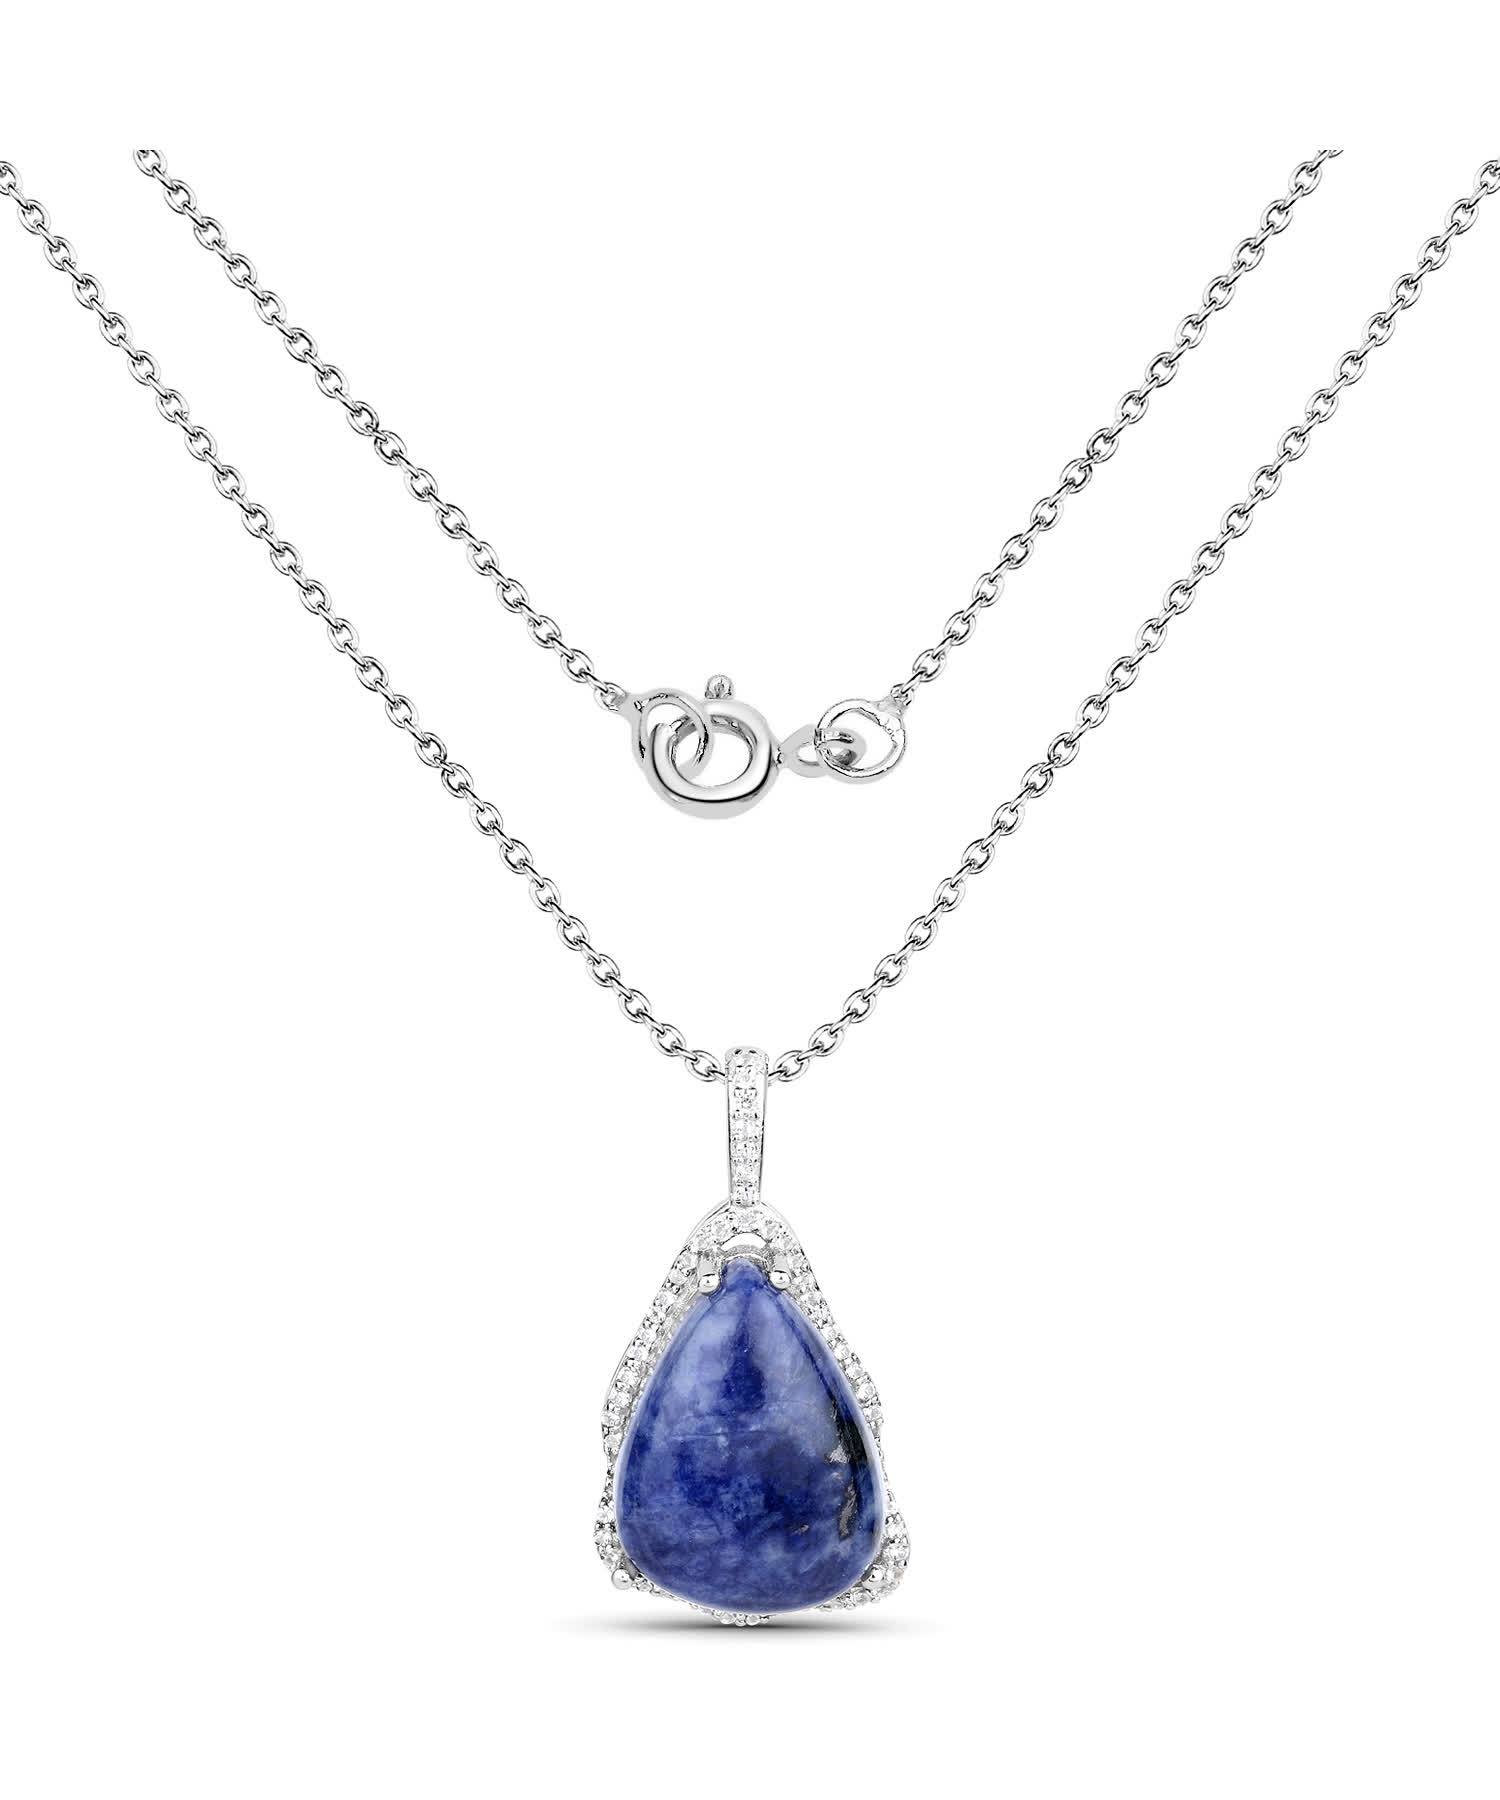 5.81ctw Natural Aventurine and Topaz Rhodium Plated 925 Sterling Silver Pendant With Chain View 2